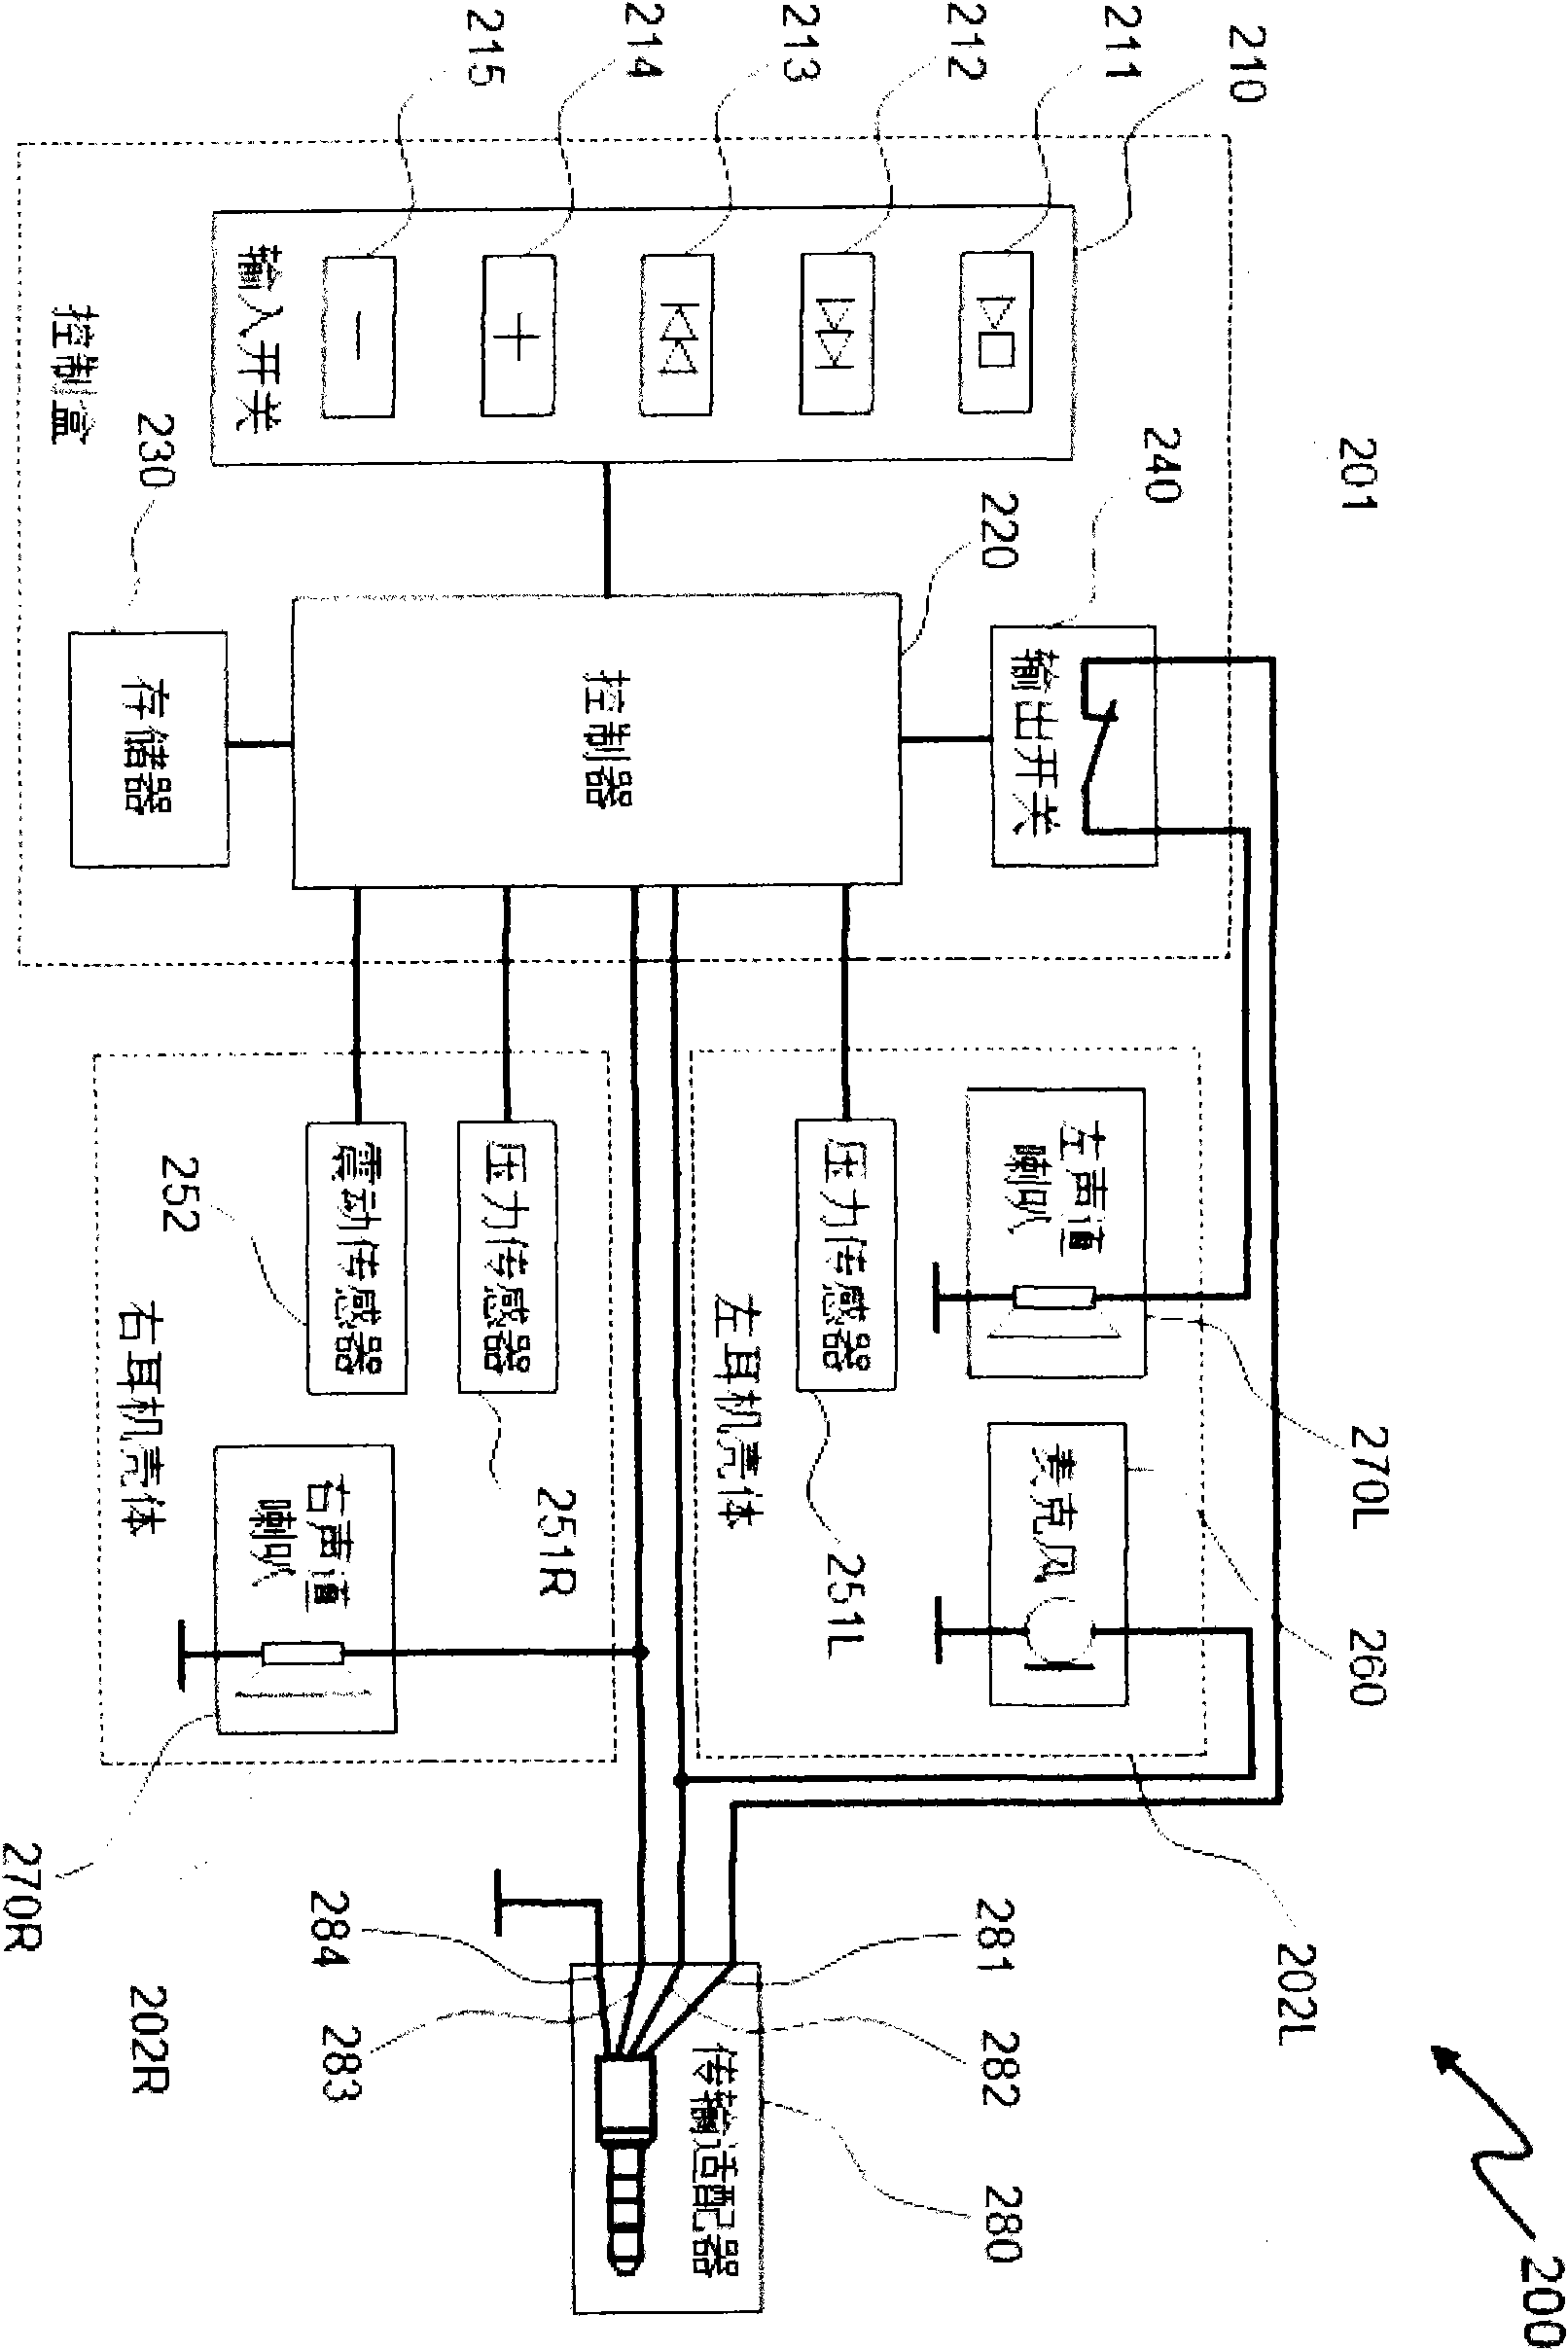 Auditory canal control device